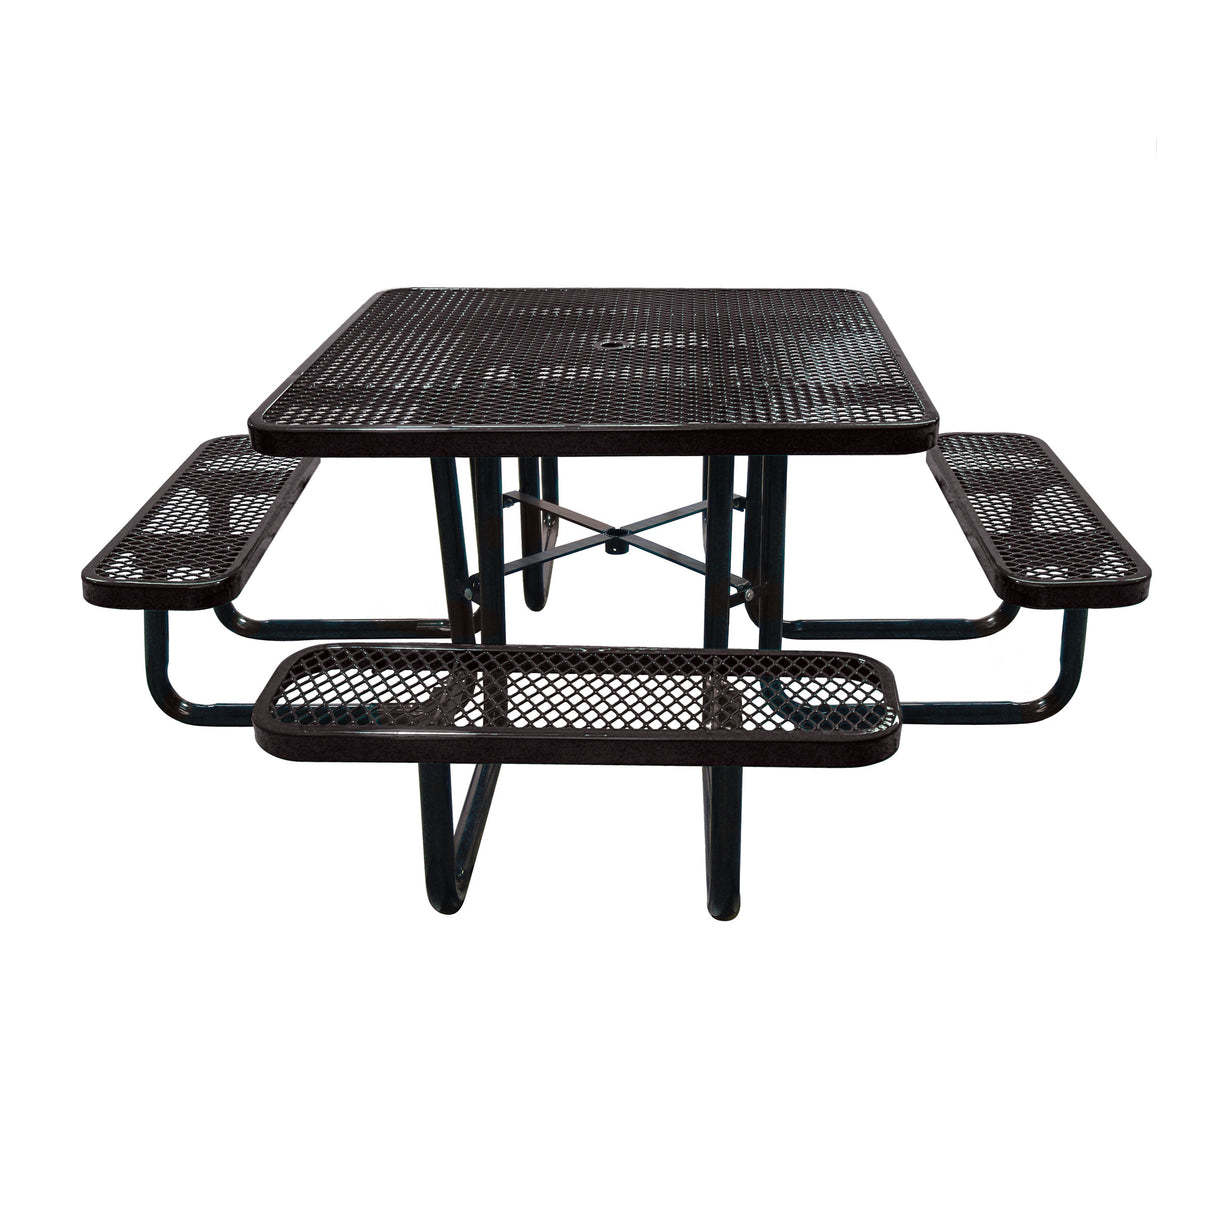 46˝ Square Expanded Metal Table